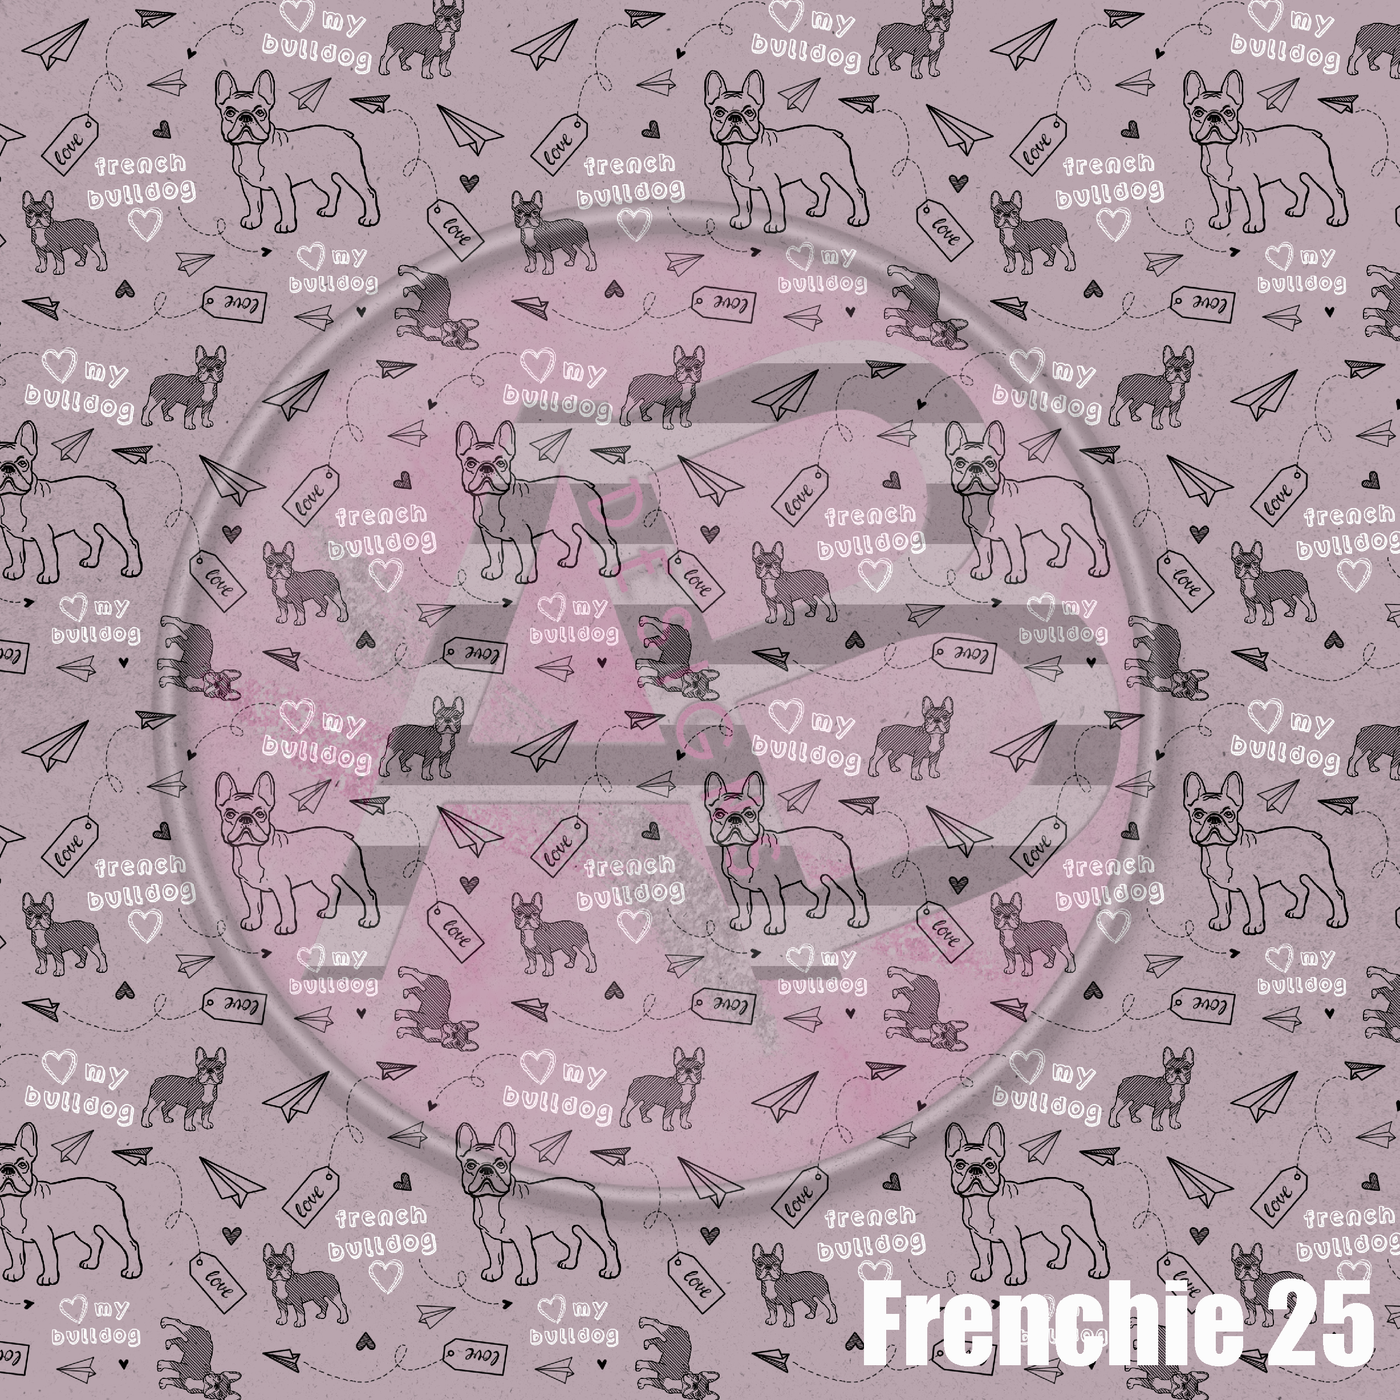 Adhesive Patterned Vinyl - Frenchie 25